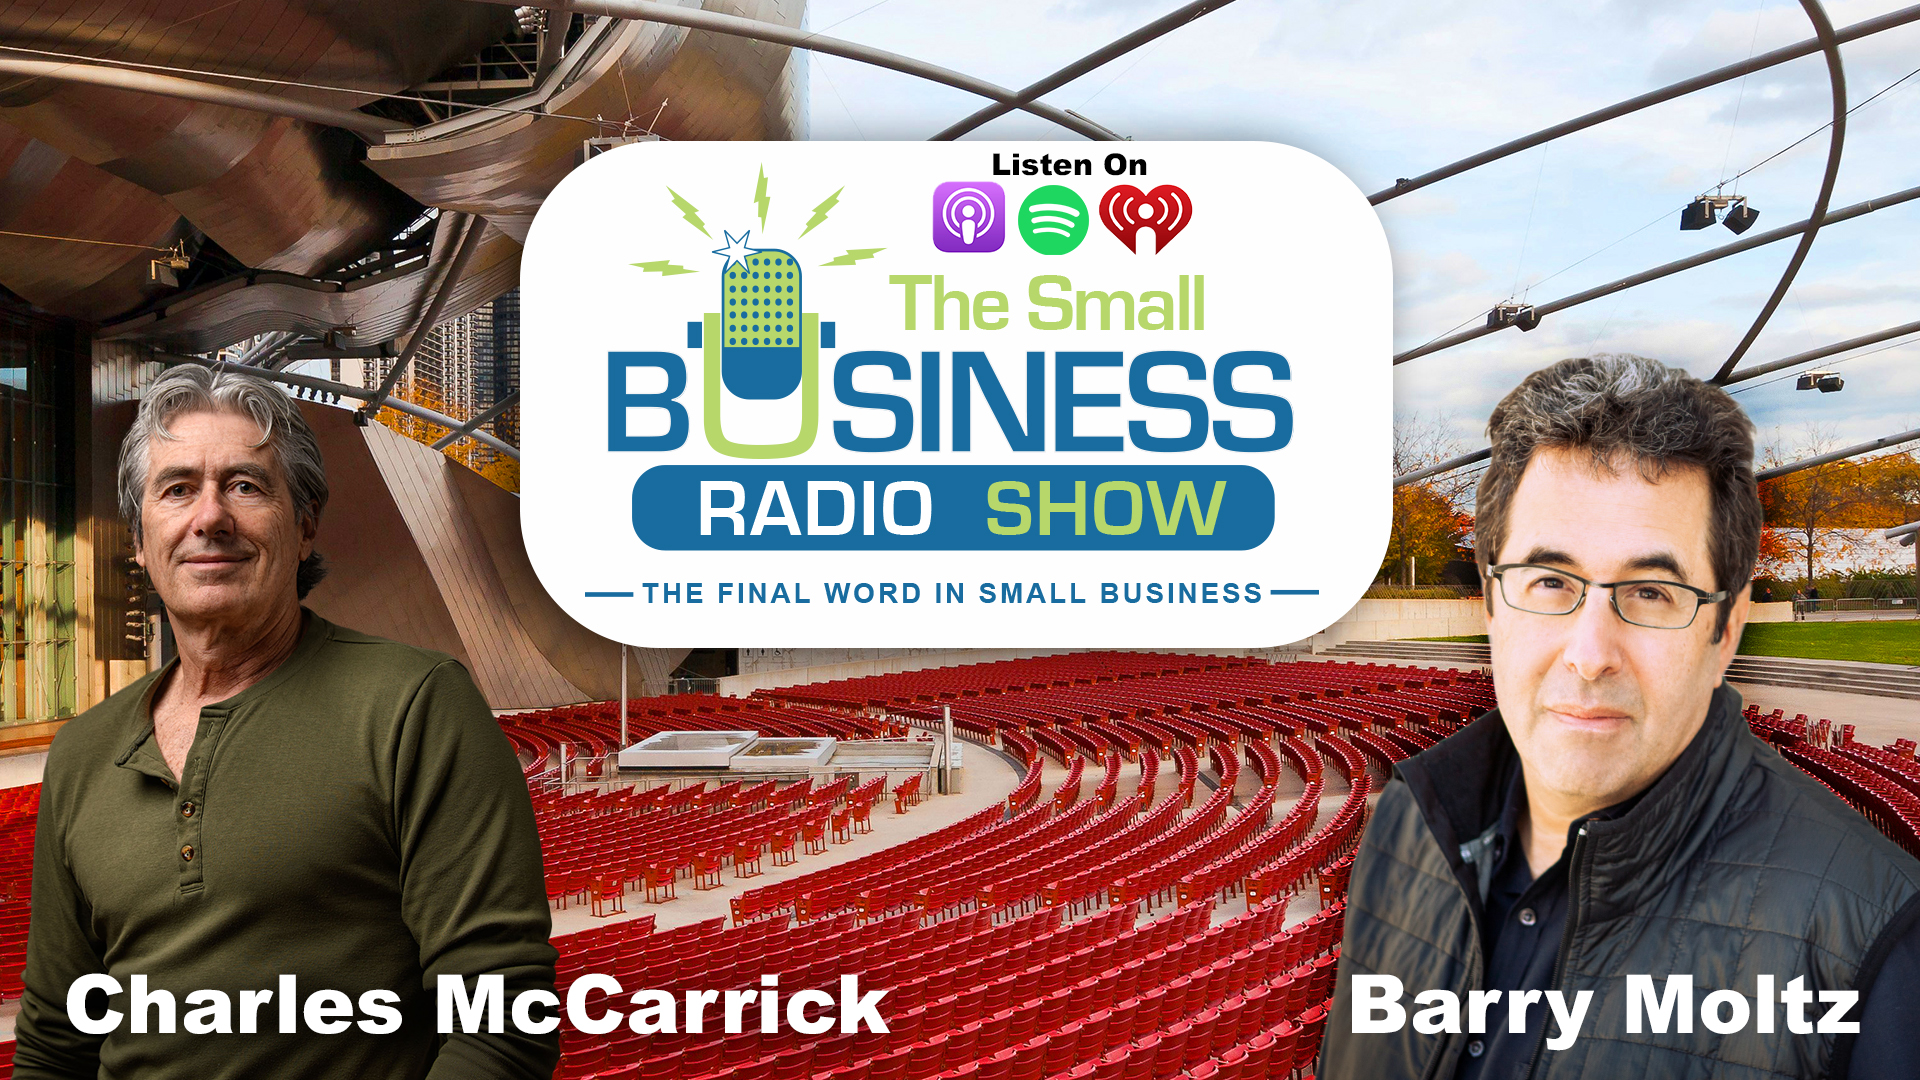 Charles McCarrick on The Small Business Radio Show